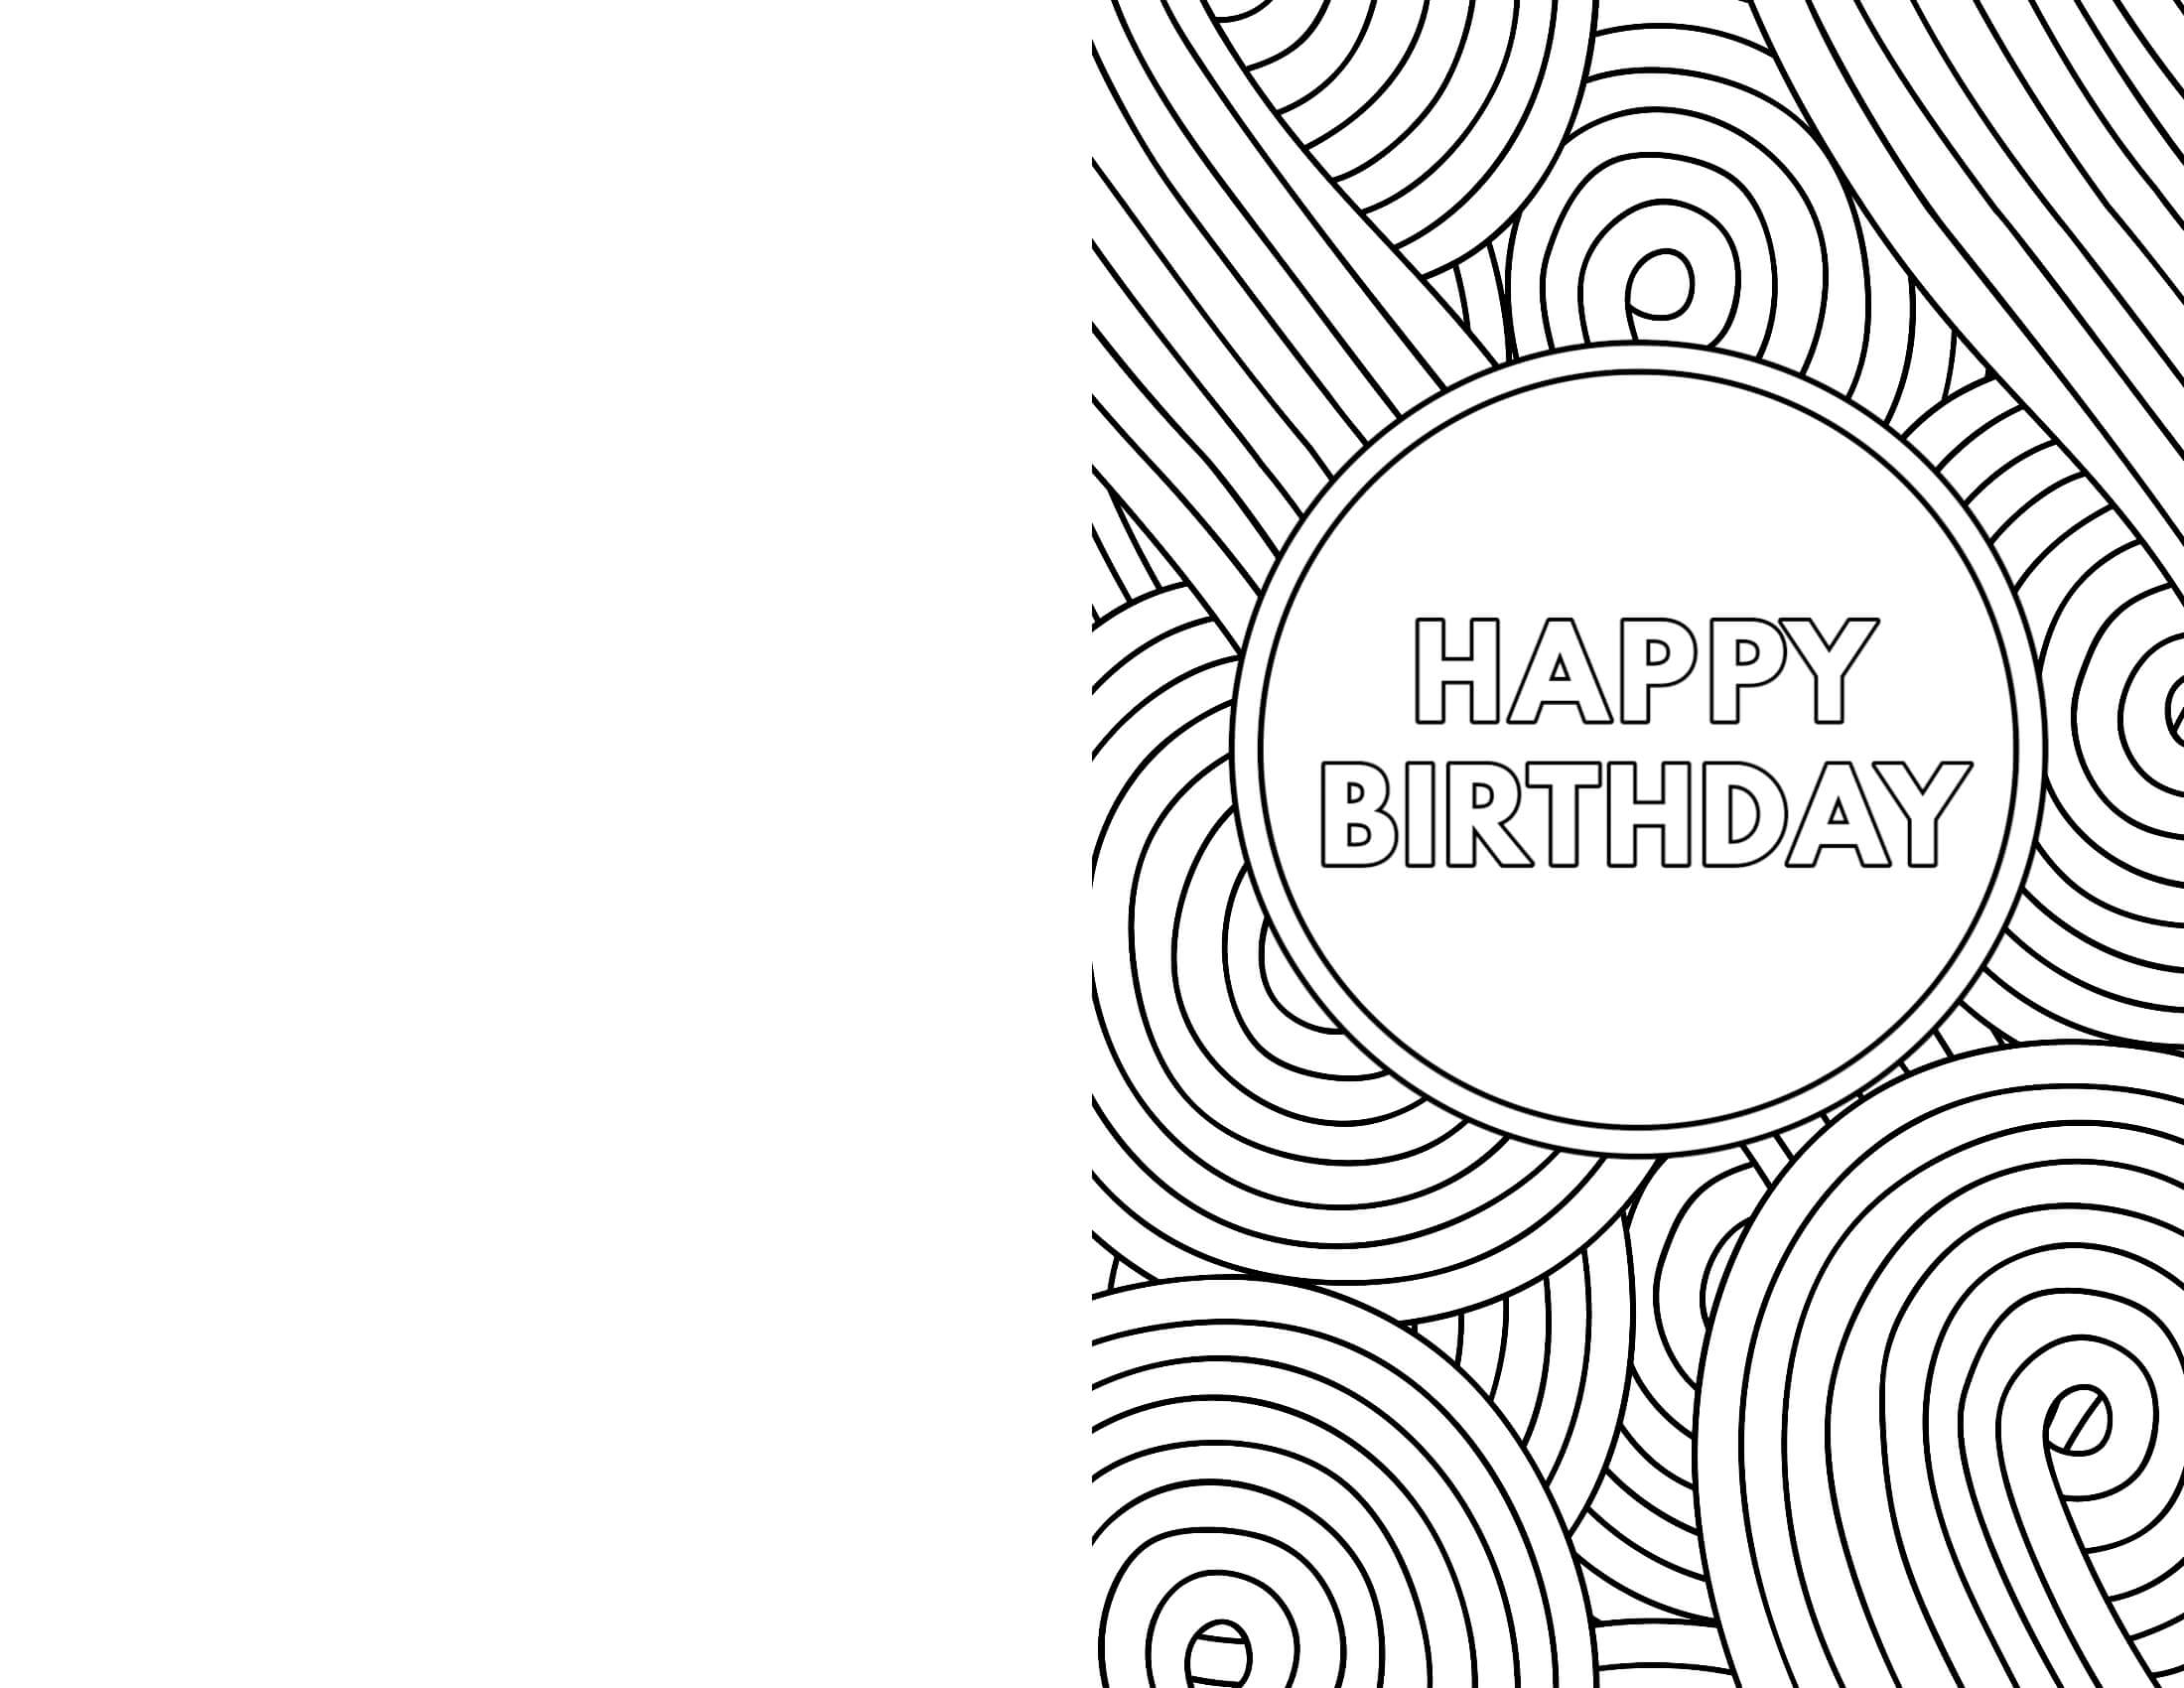 Coloring Book : Birthday Coloring Cards Freentable With Throughout Foldable Birthday Card Template